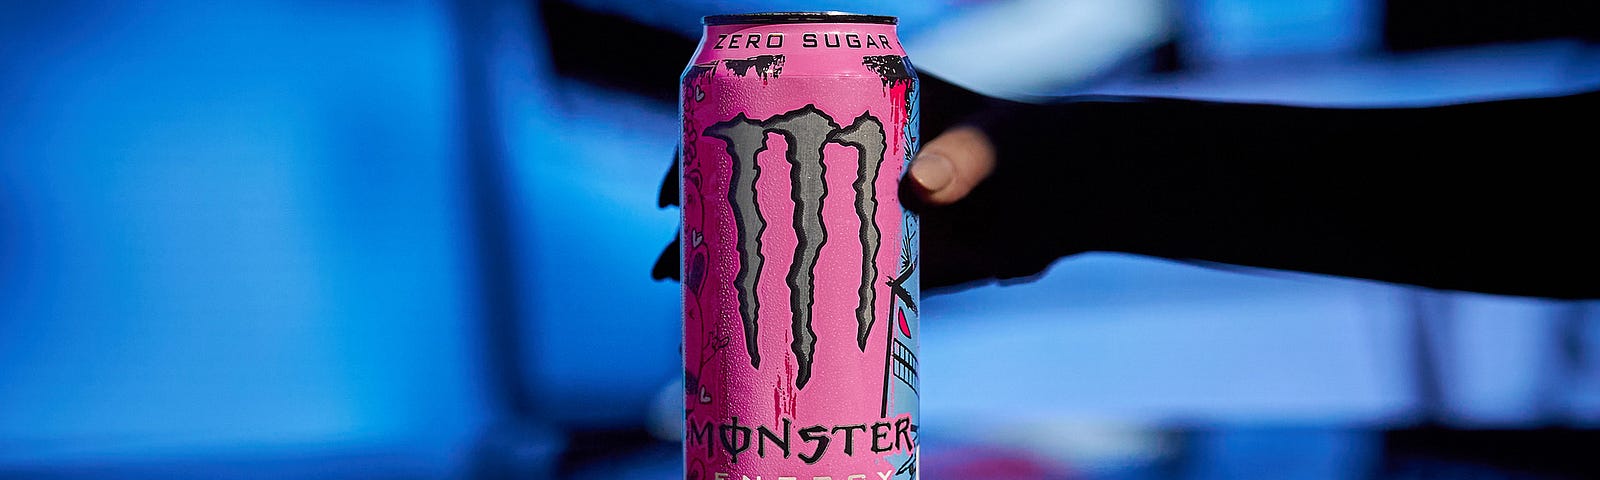 The new Monster Energy Ultra Fantasy Ruby Red flavor can is pictured, specially designed by acclaimed artist Pinky Taylor.